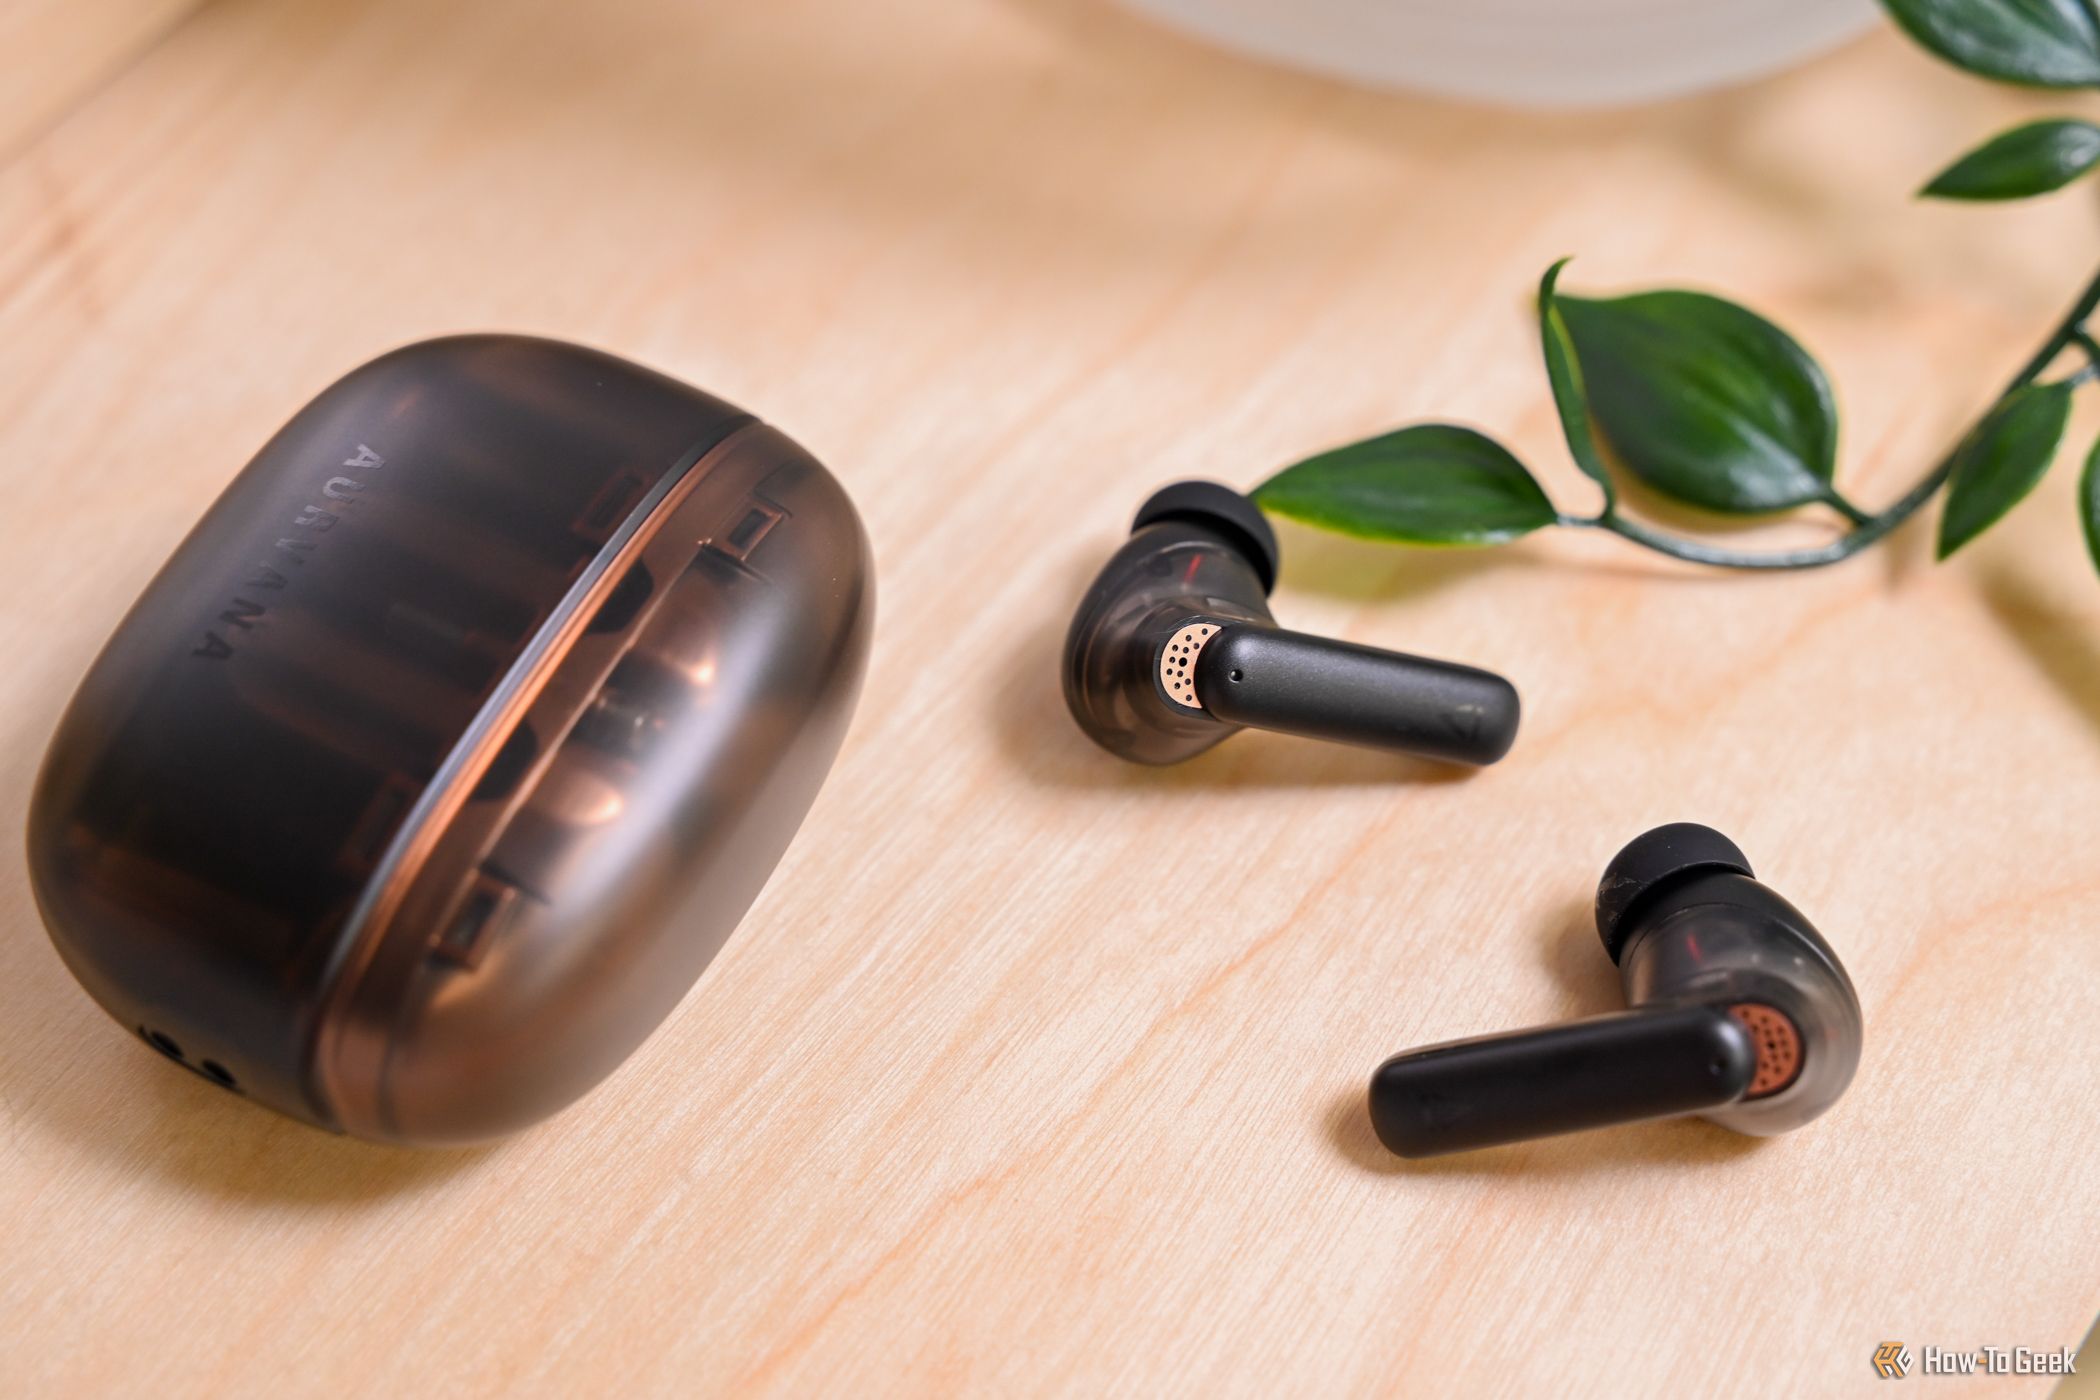 The Creative Aurvana Ace 2 earbuds in front of their case